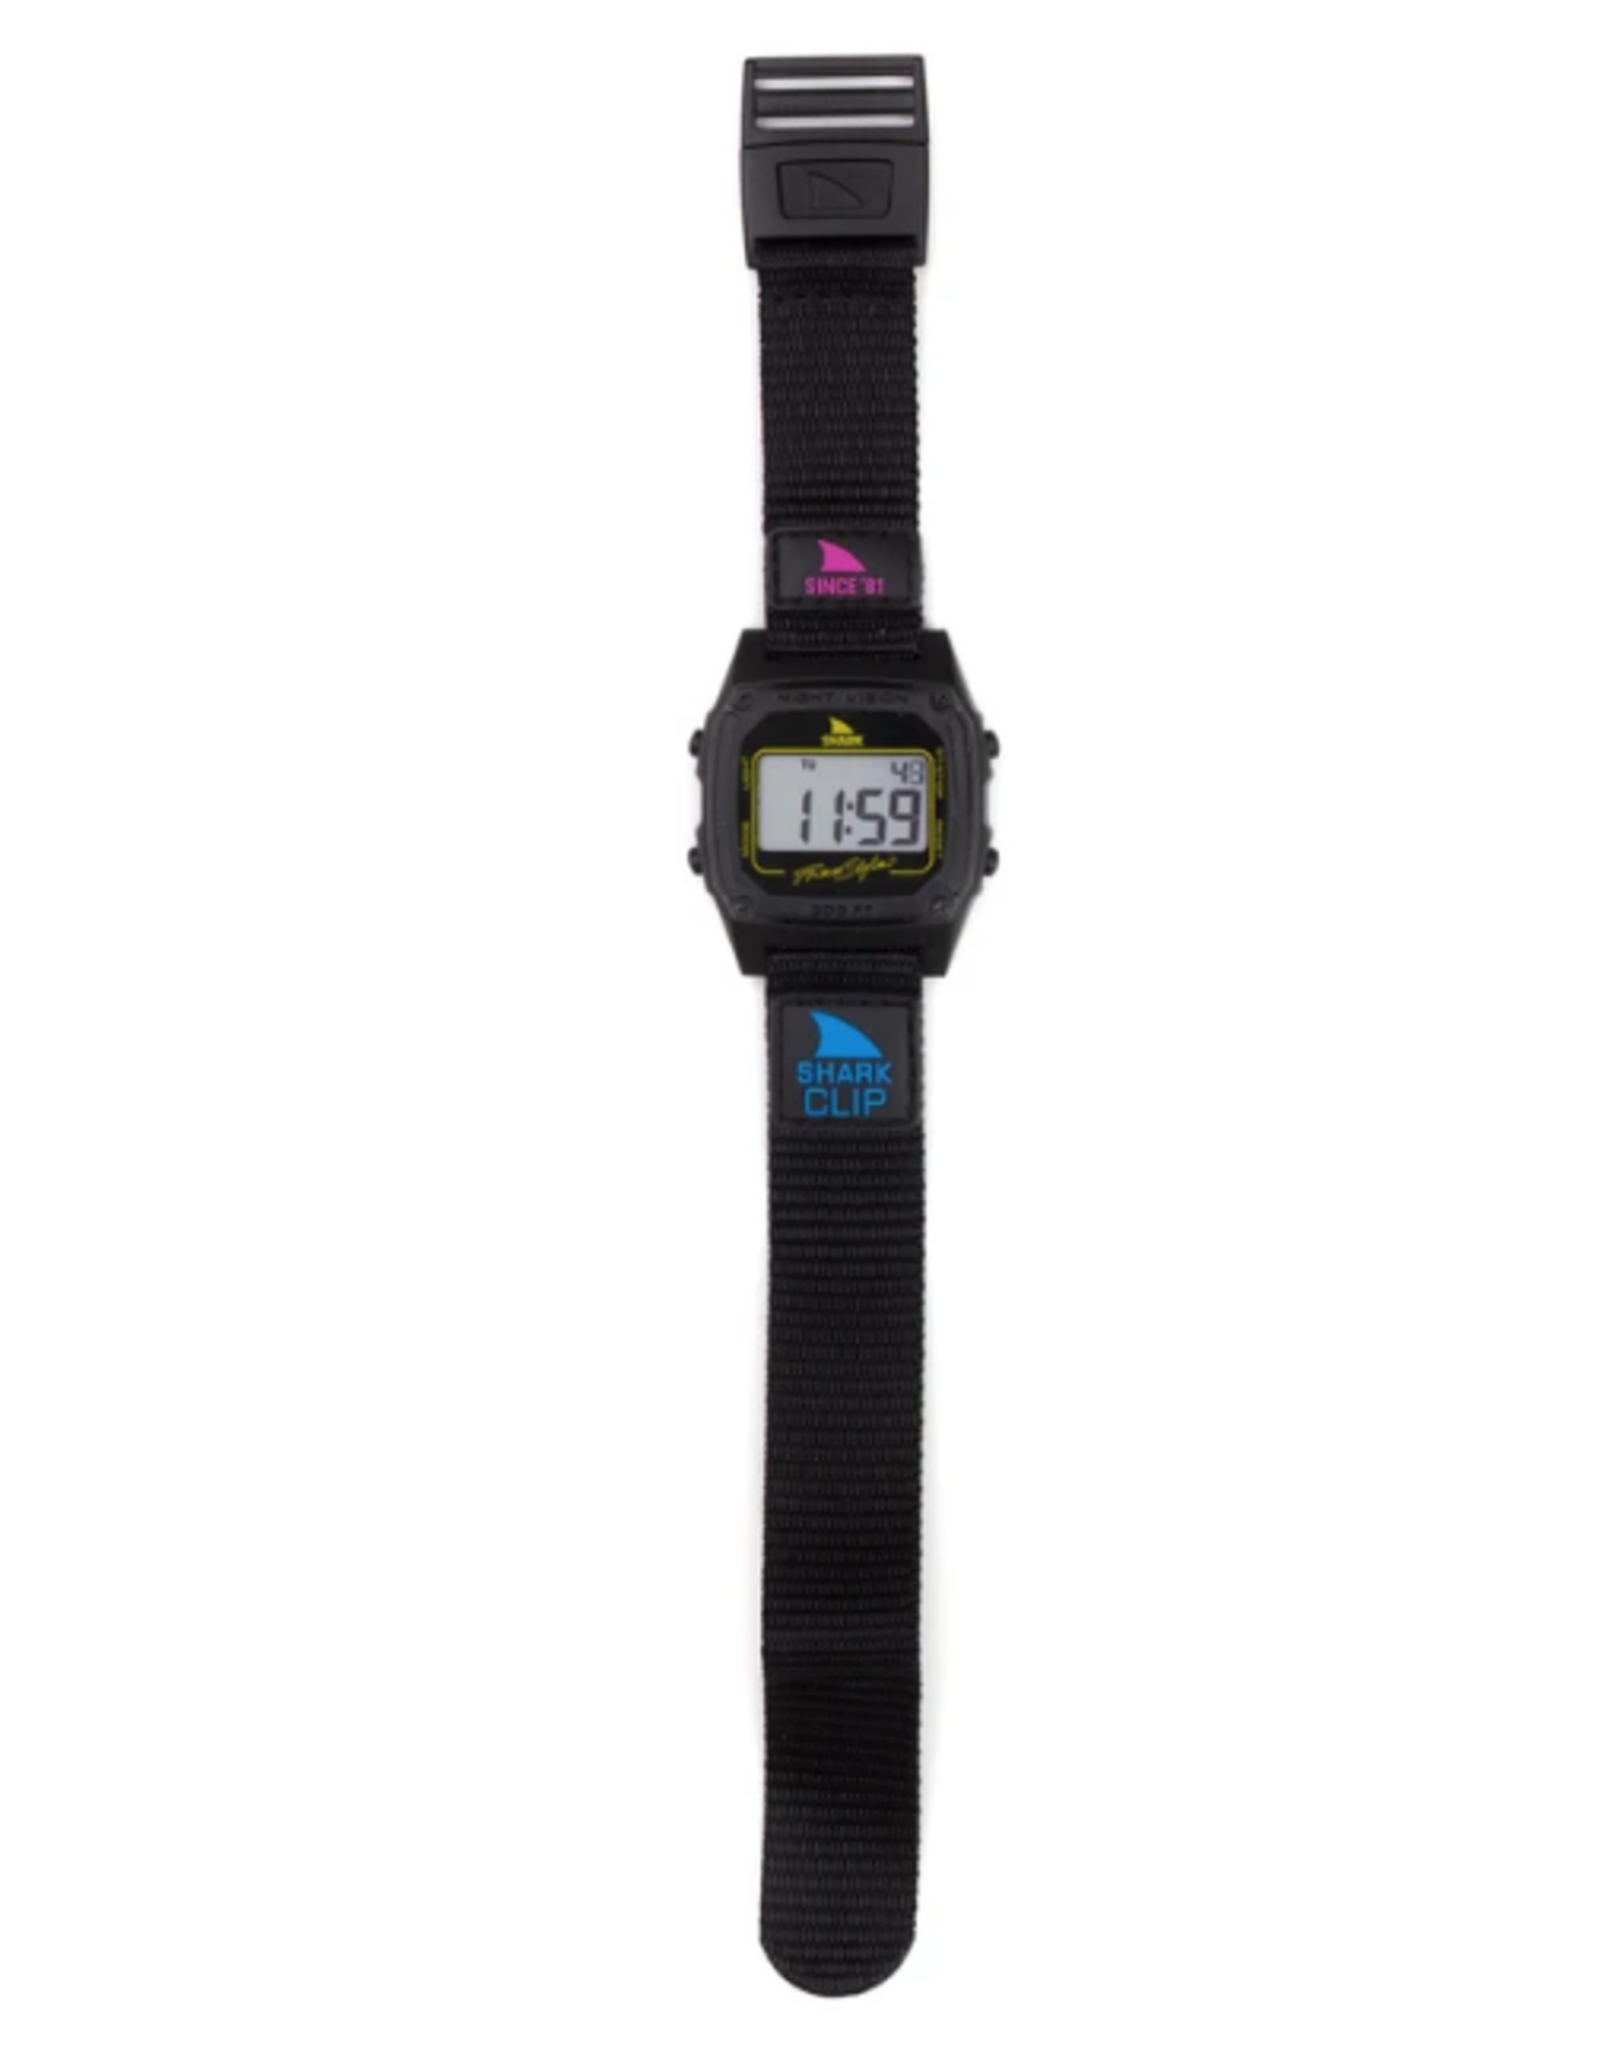 FREESTYLE FREESTYLE SHARK CLASSIC CLIP PRIMARY BLACK WATCH